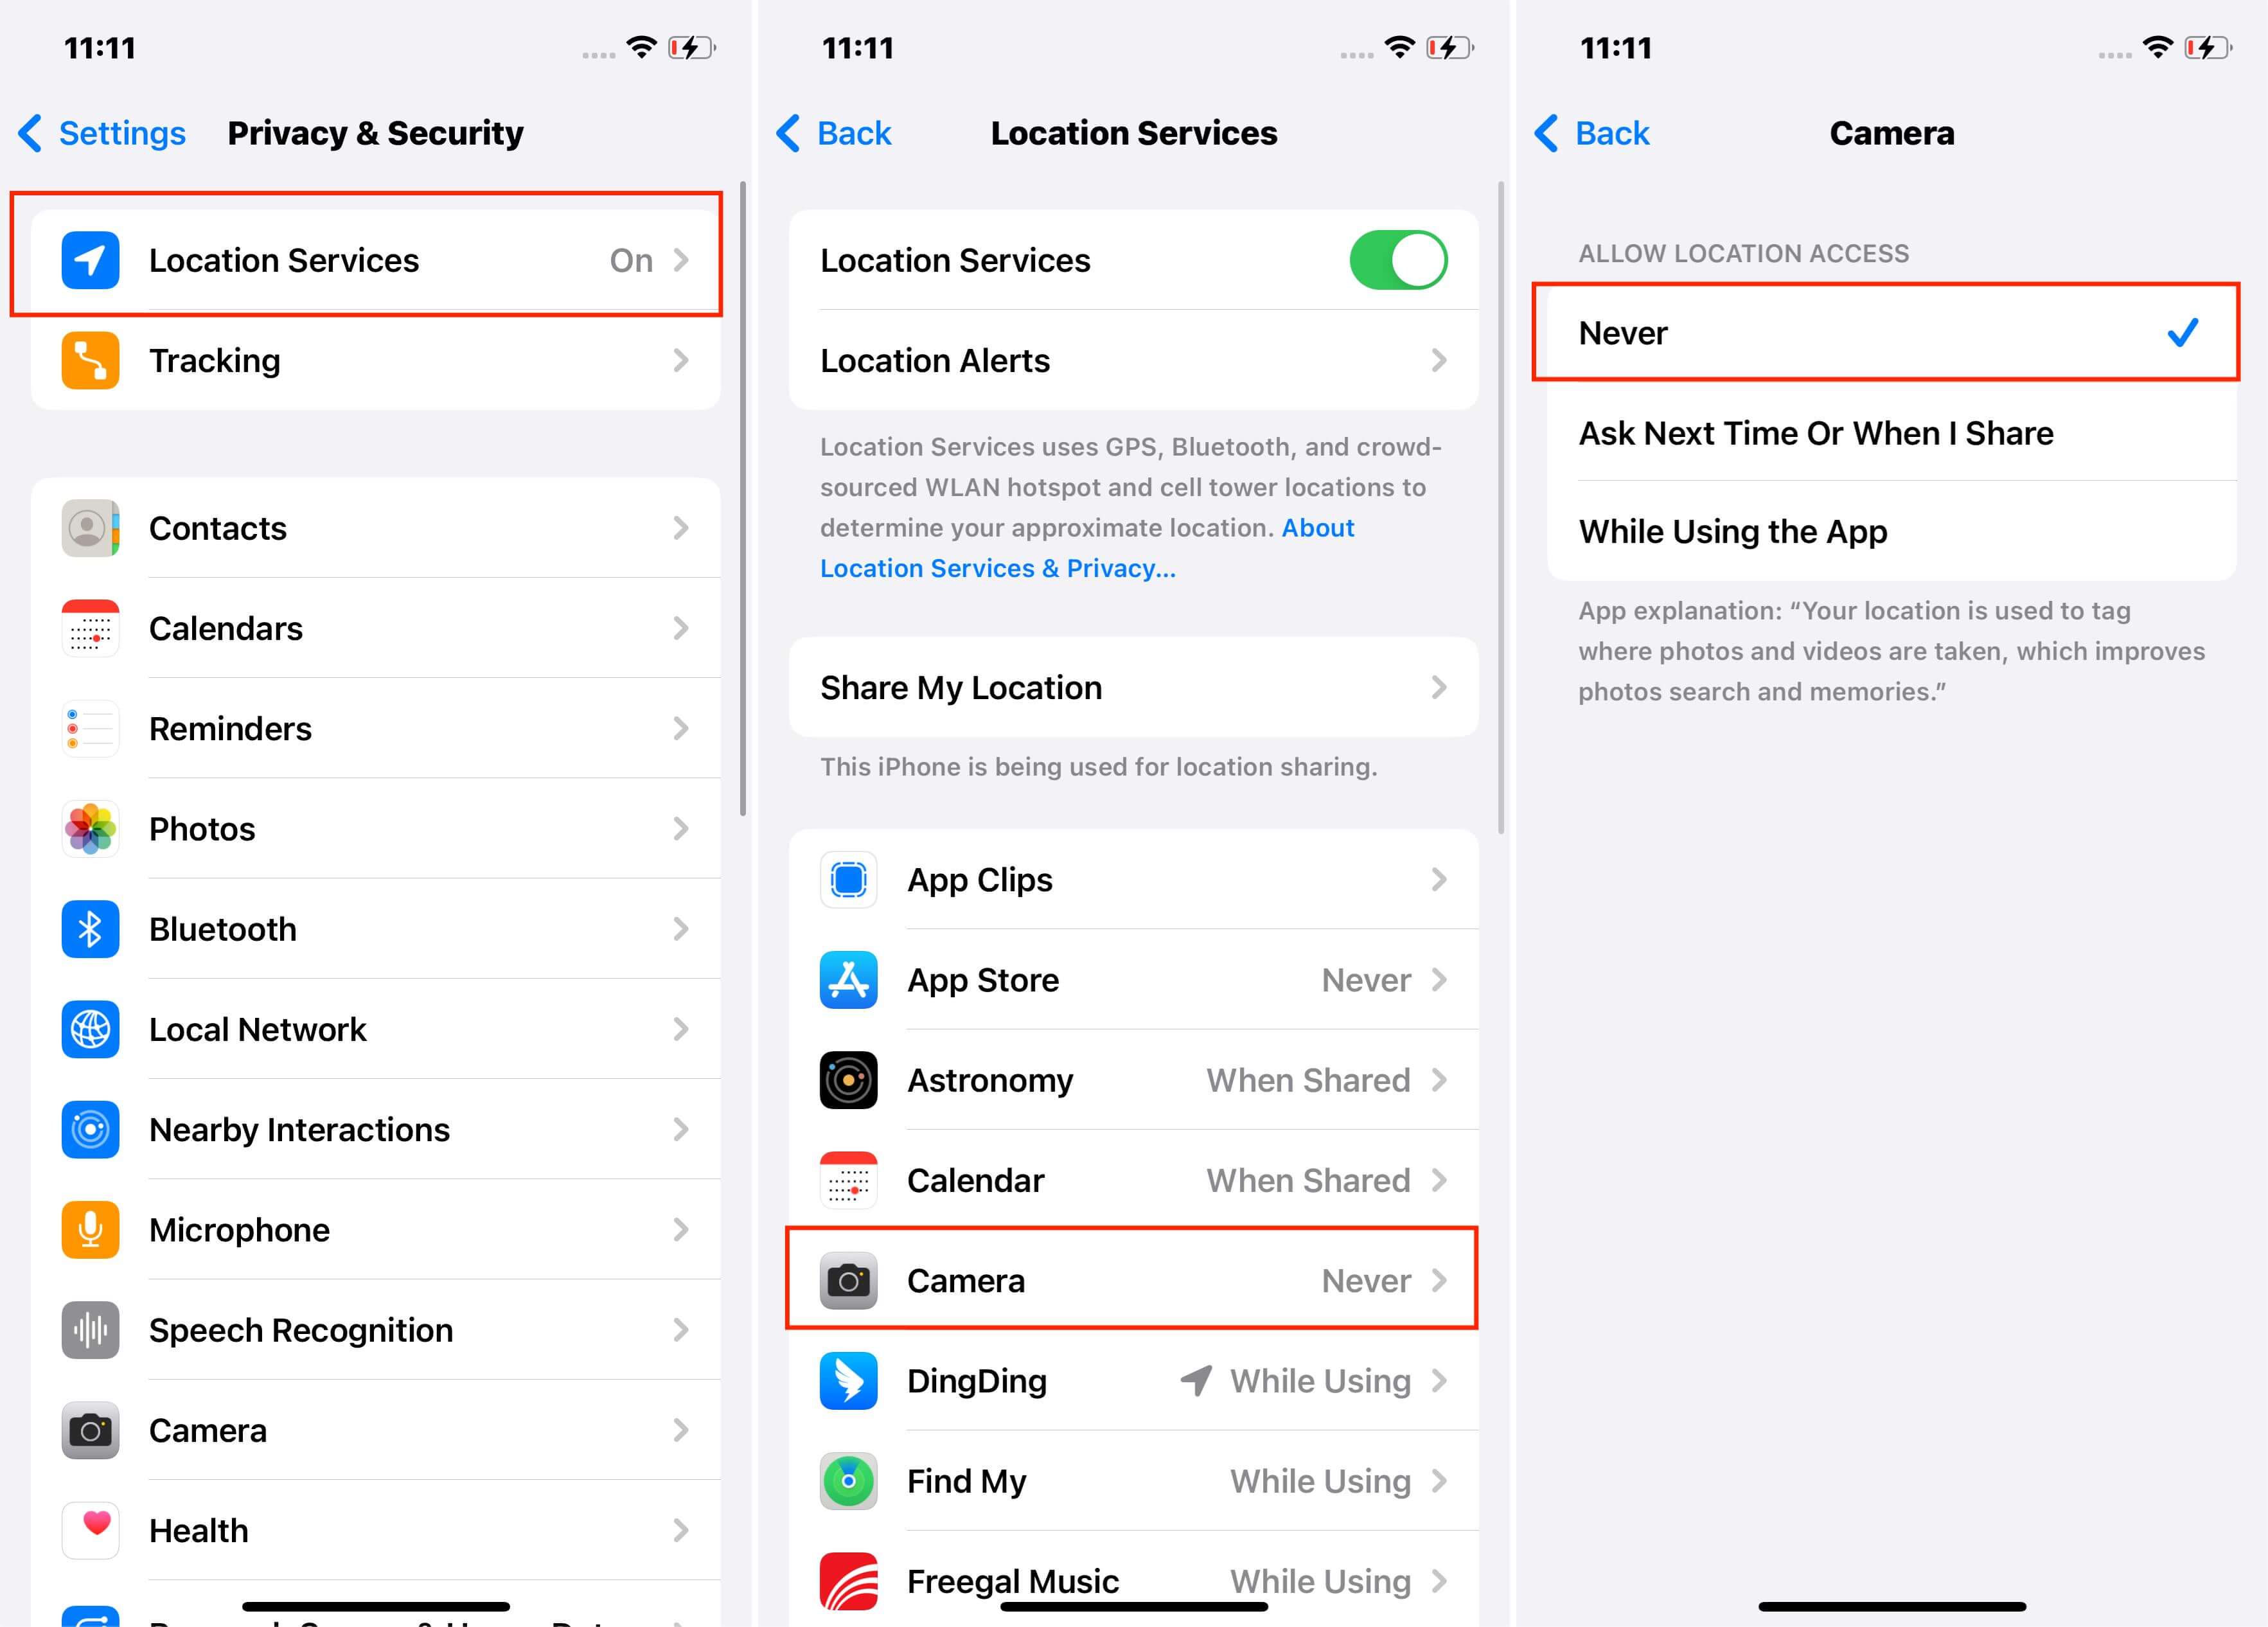 iPhone Locations Services Steps to Location Access for Camera Never Selected